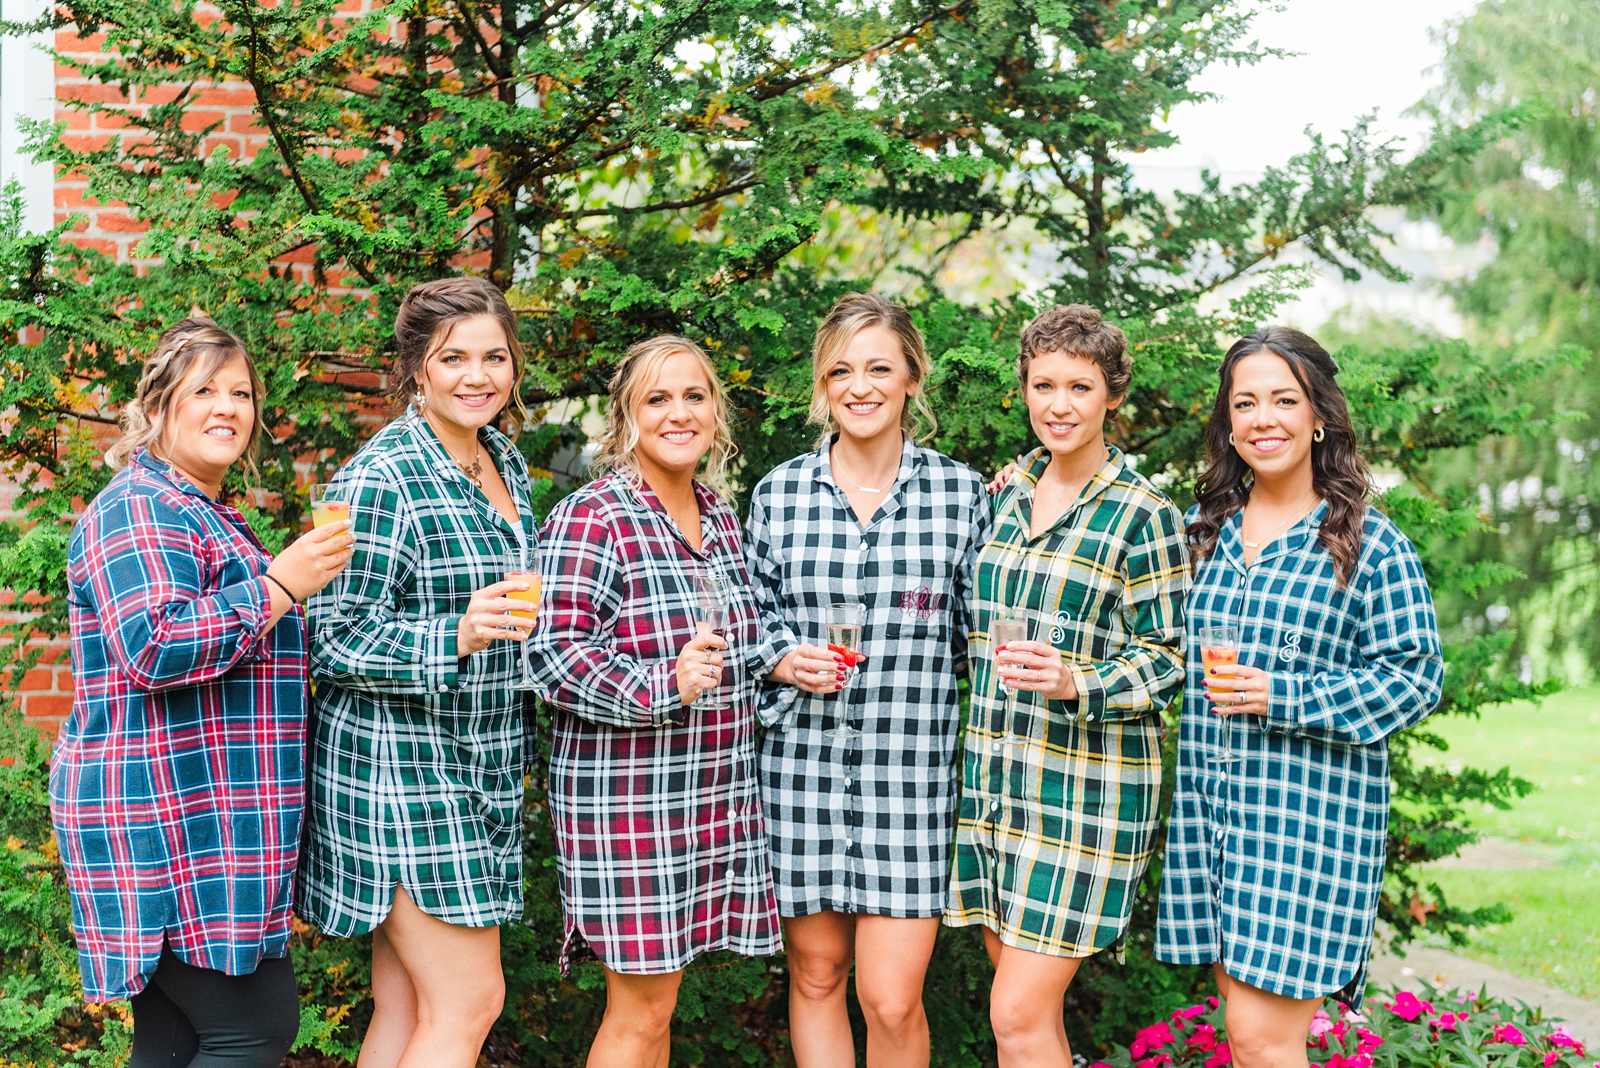 Bride and bridesmaids in matching flannels